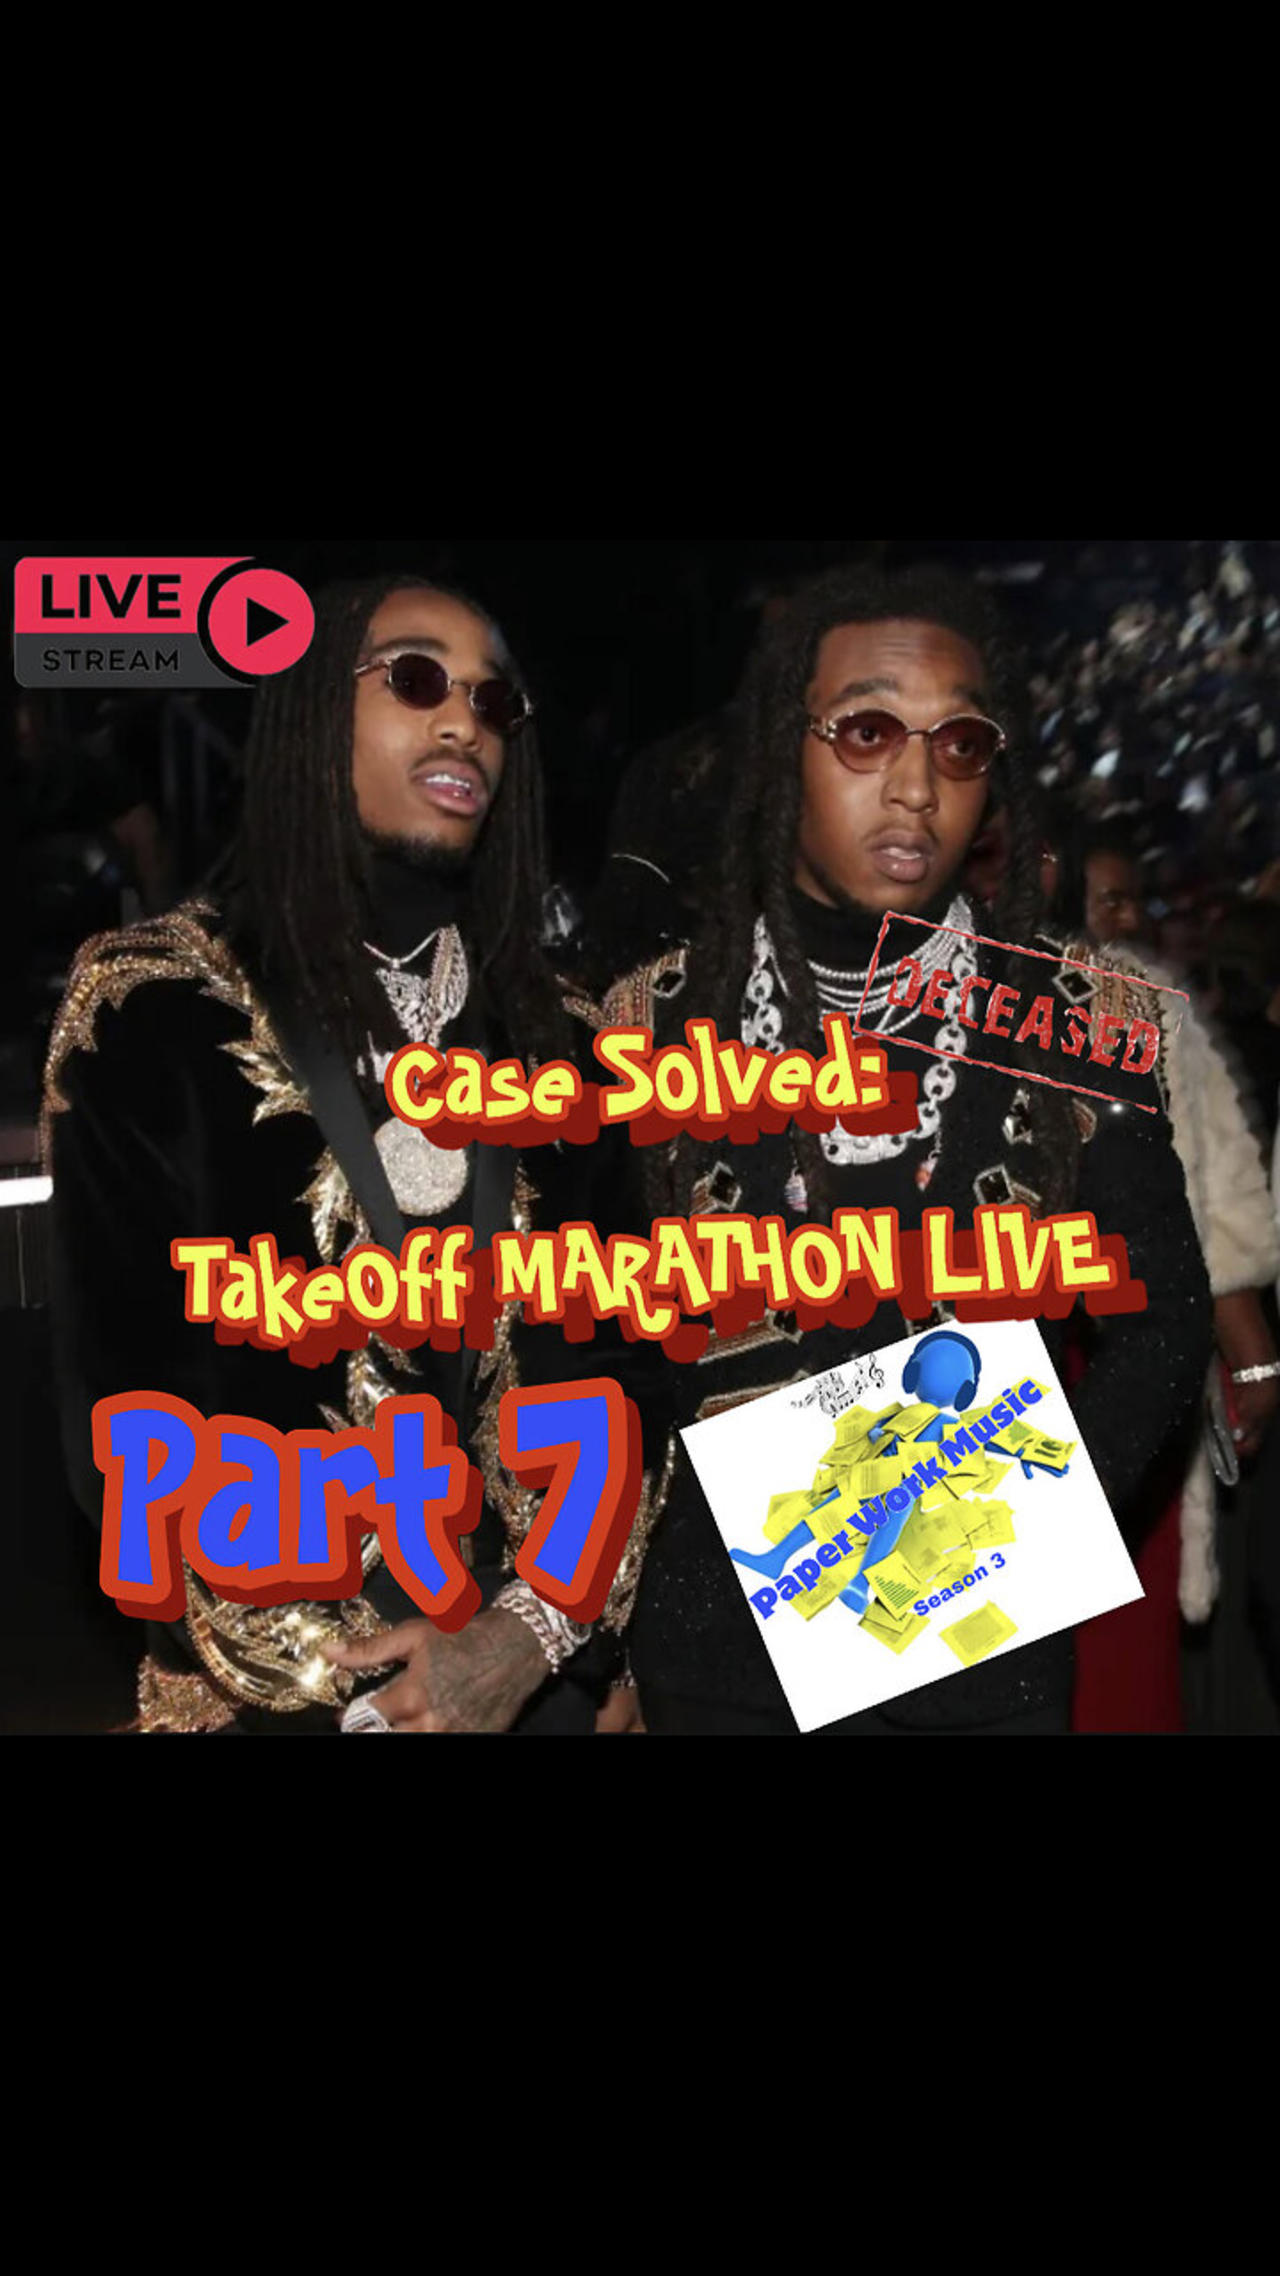 LIVE: Part 7 CASE SOLVED by Paper Work Party: TakeOff "FLASHBACK" MARATHON